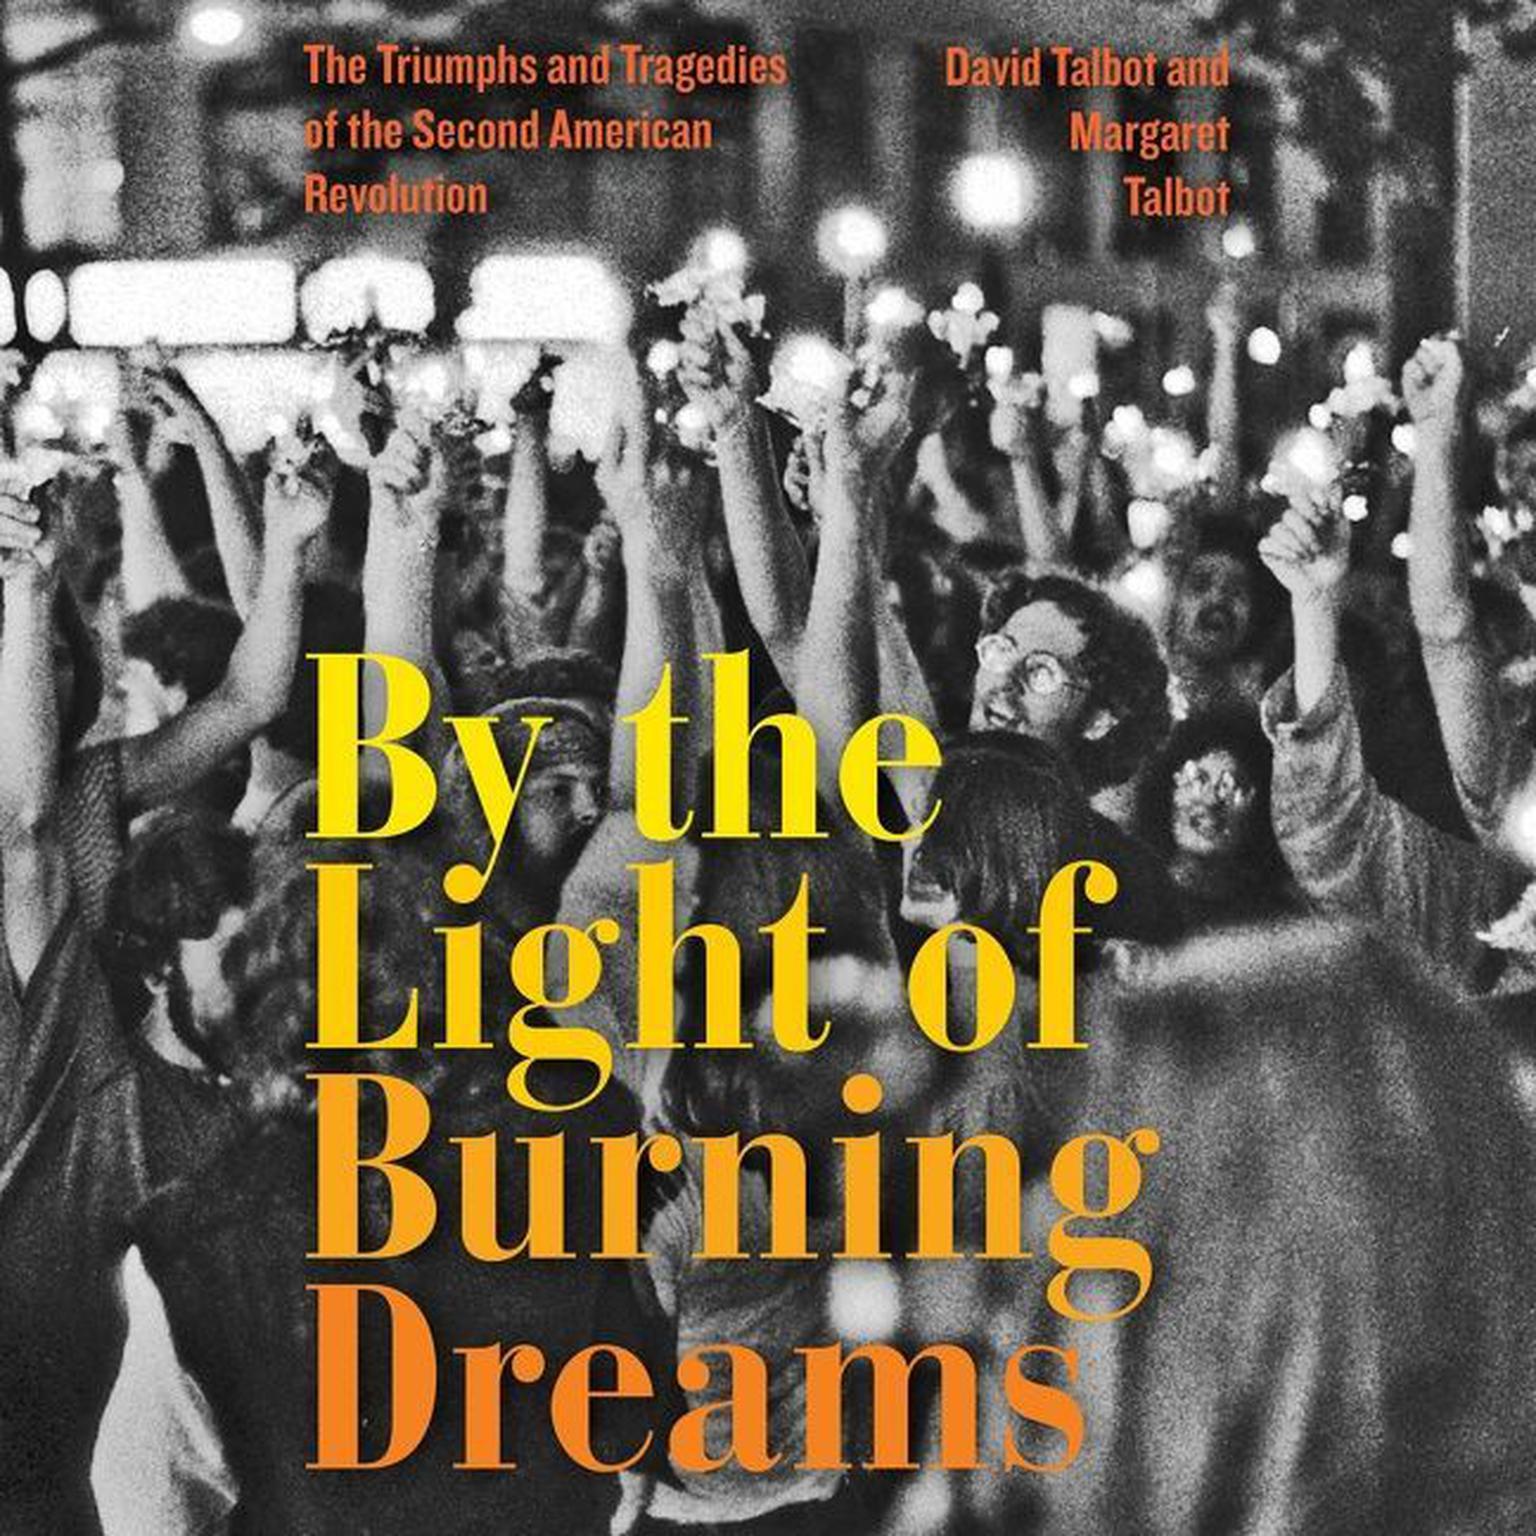 By the Light of Burning Dreams: The Triumphs and Tragedies of the Second American Revolution Audiobook, by David Talbot